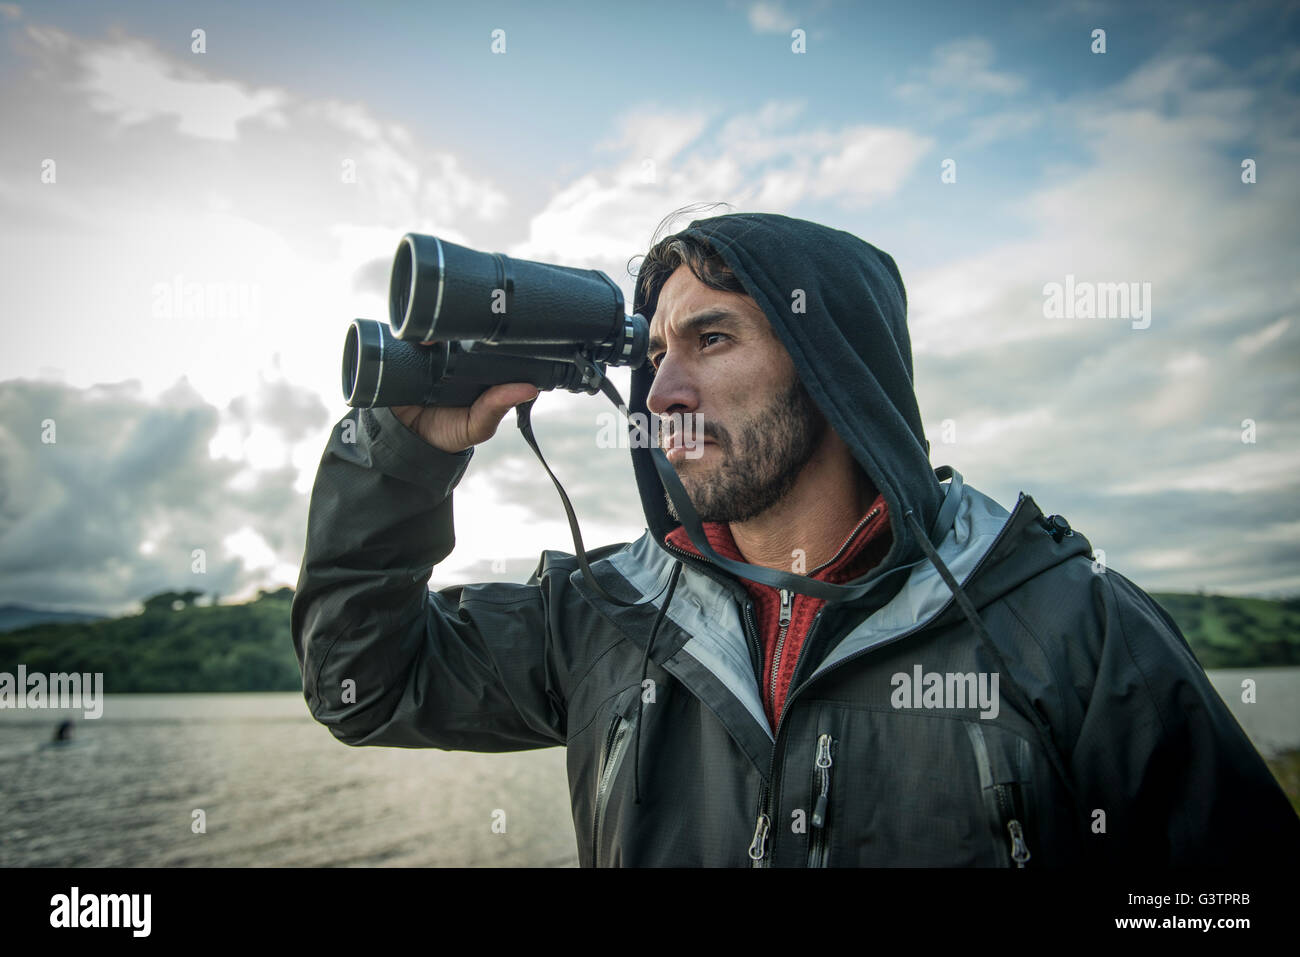 A bearded man in hiking clothes using binoculars on the shore of Bala Lake in Wales. Stock Photo